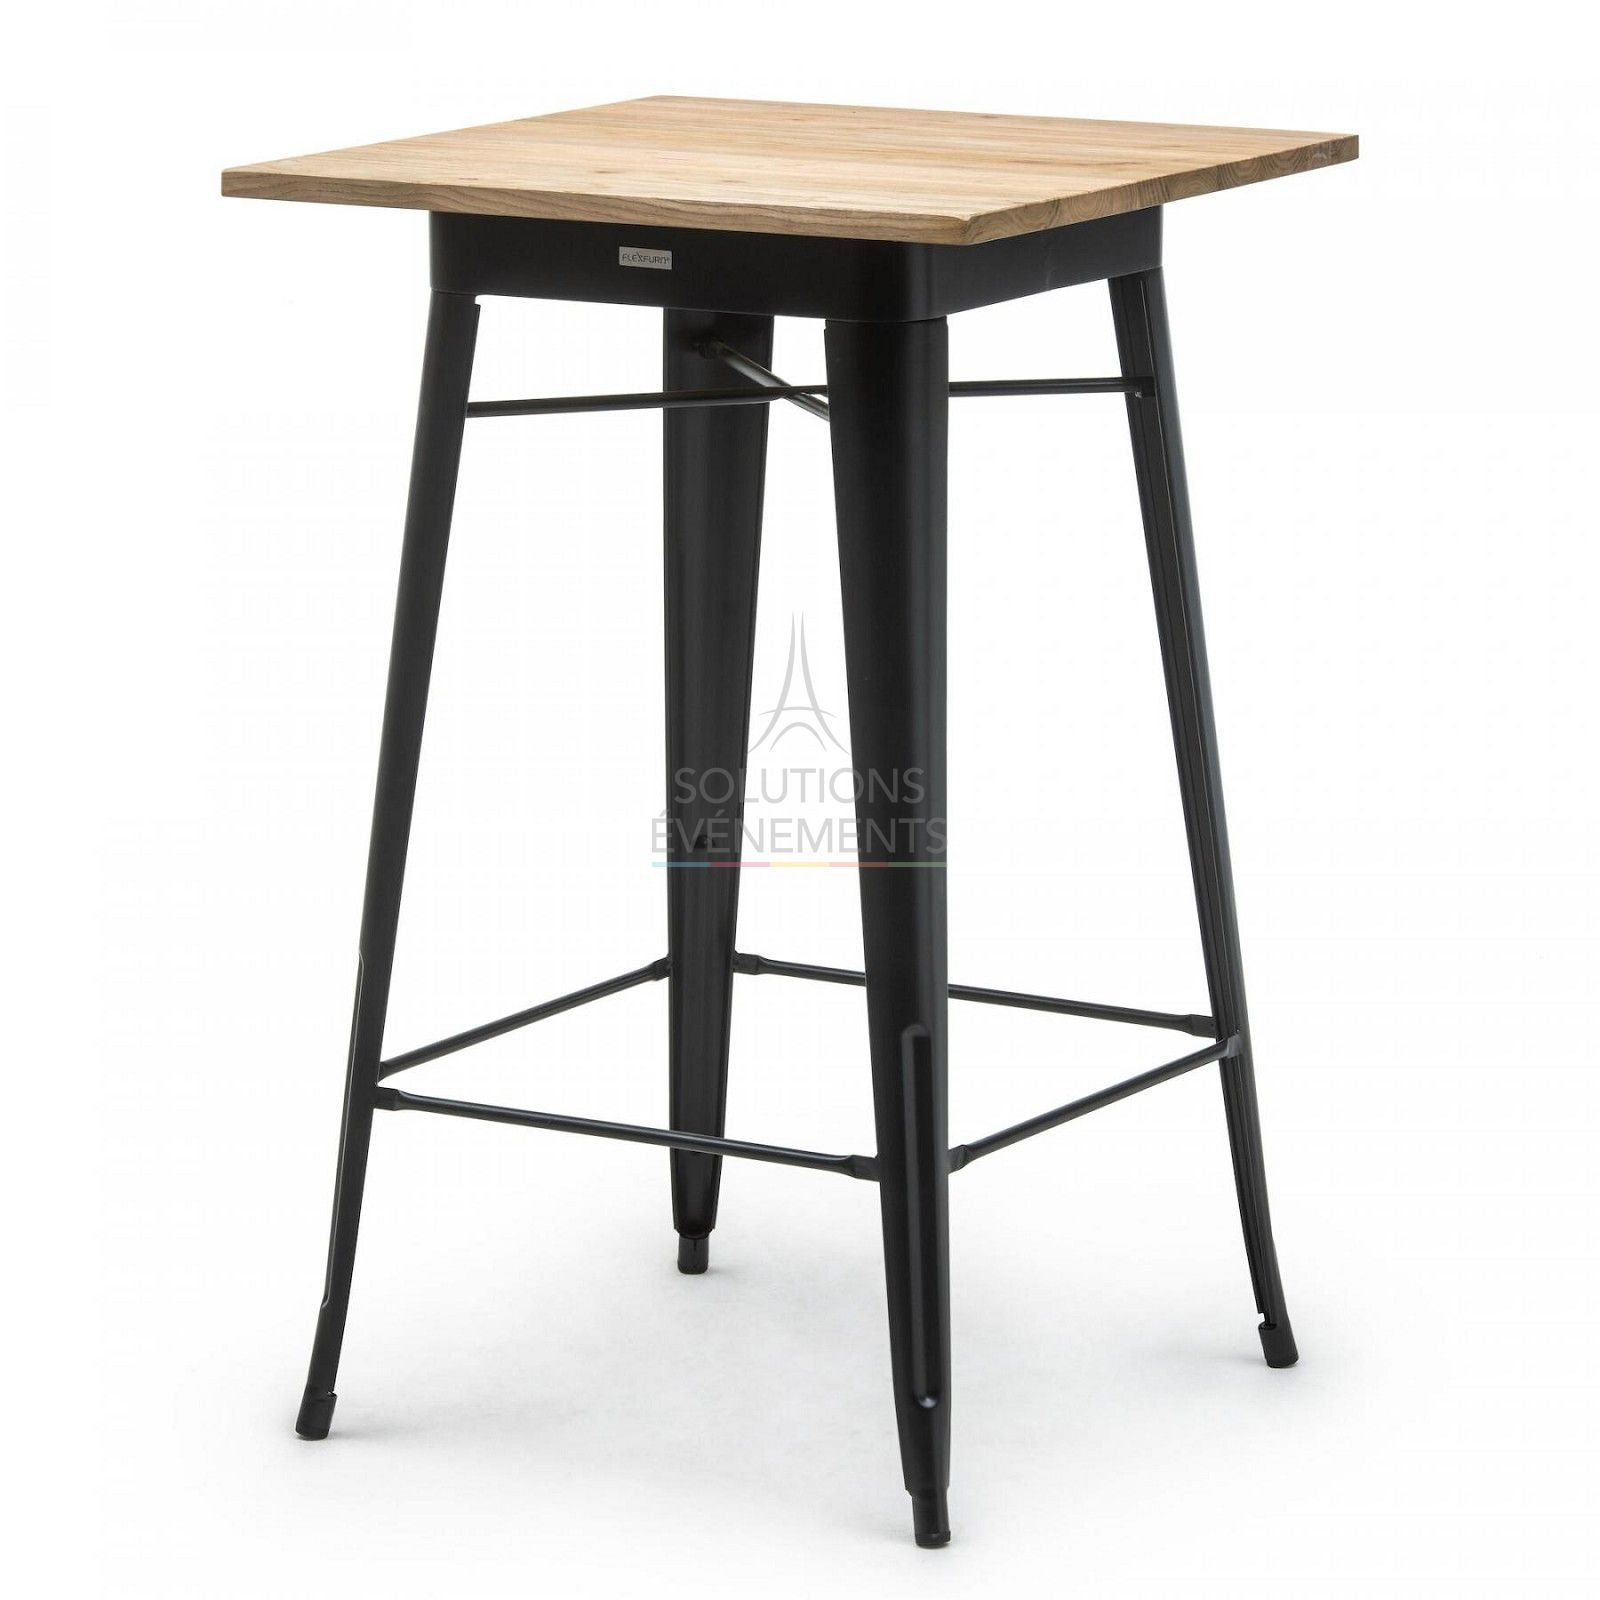 Rental of industrial high table with wooden top.